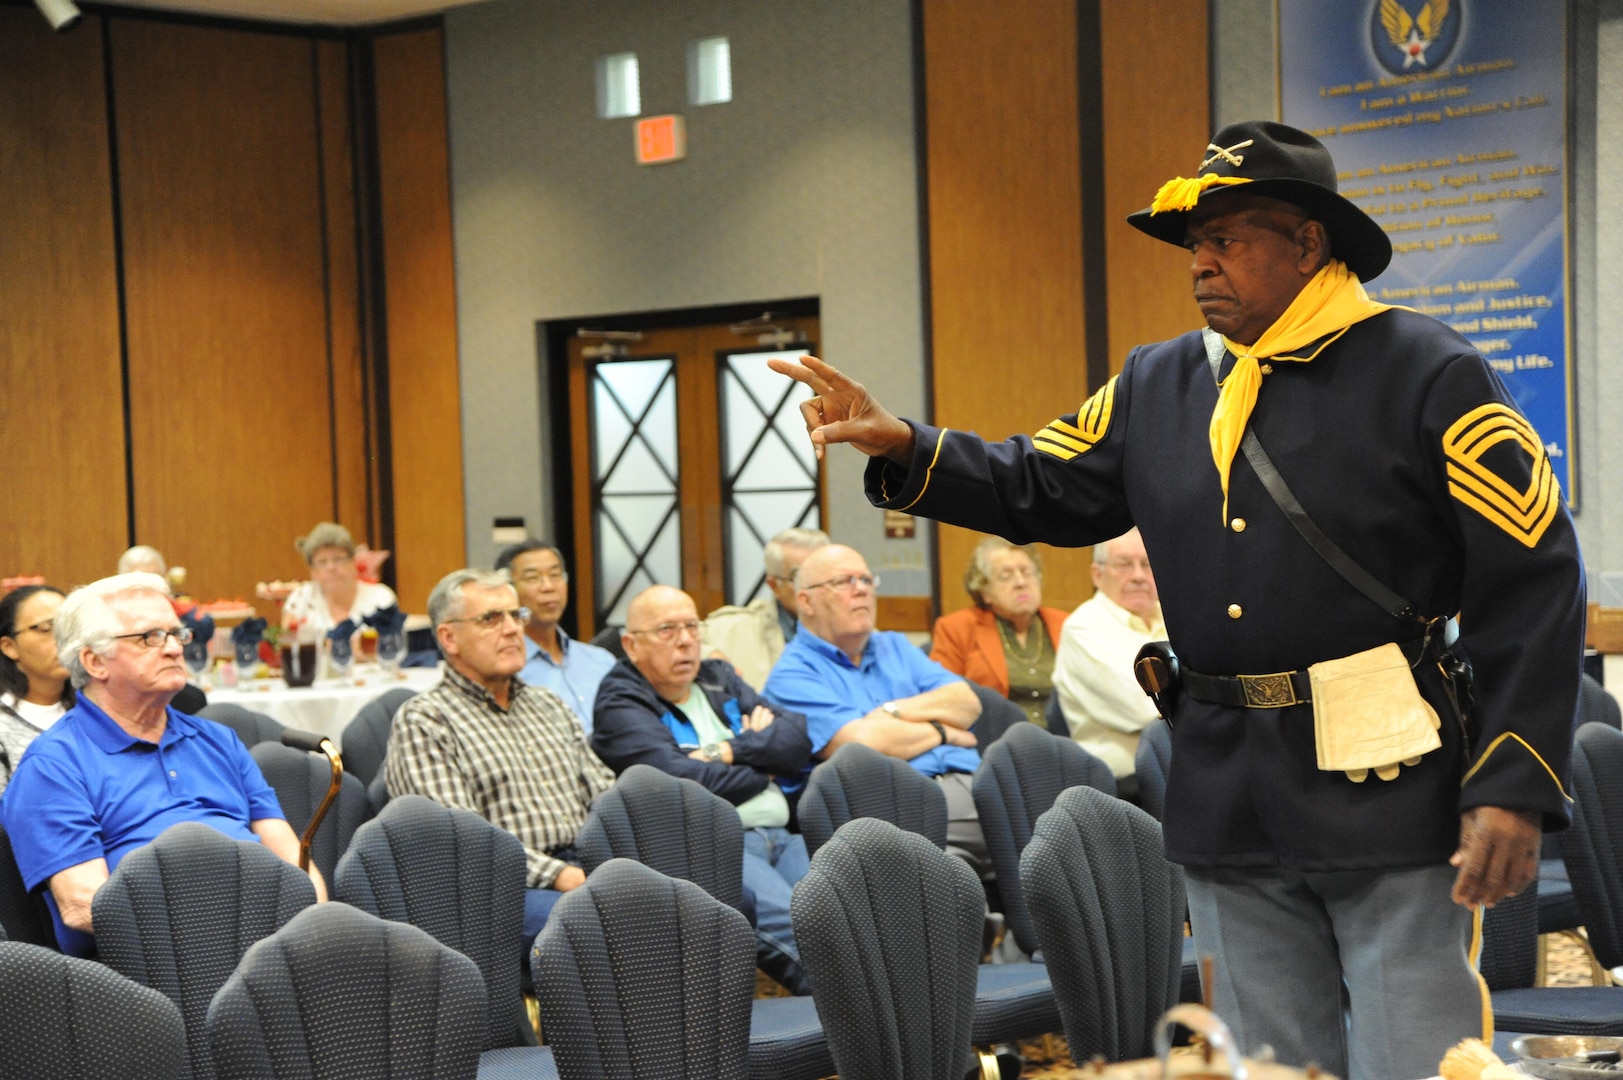 Billy Gordon, member of the Bexar County Buffalo Soldiers Association, speaks to attendees in honor of Black History Month about the history of the Buffalo Soldiers Feb. 2 at Joint Base San Antonio-Randolph Kendrick Club.  It is the goal of the "Bexar County Buffalo Soldiers" to educate the public as to the great contribution made by the 9th and 10th Cavalry and the black Seminoles Indian Scouts, in bringing peace to the Western Frontier during what is known as the "Indian War Period."   (U.S. Air Force photo by Melissa Peterson/Released)